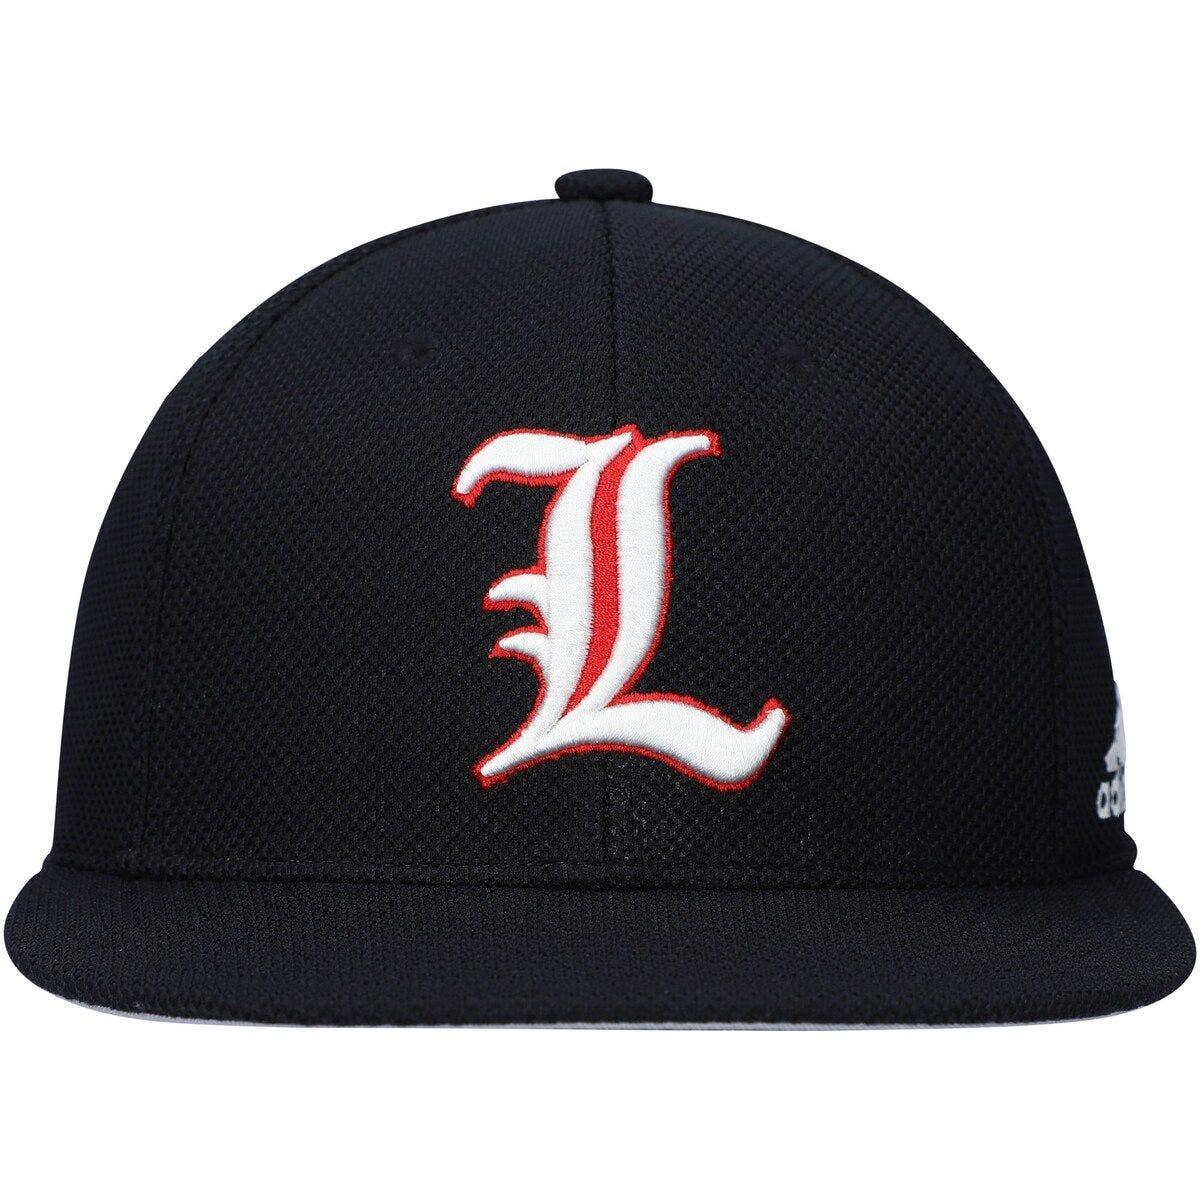 Louisville Cardinals adidas On-Field Baseball Fitted Hat - White